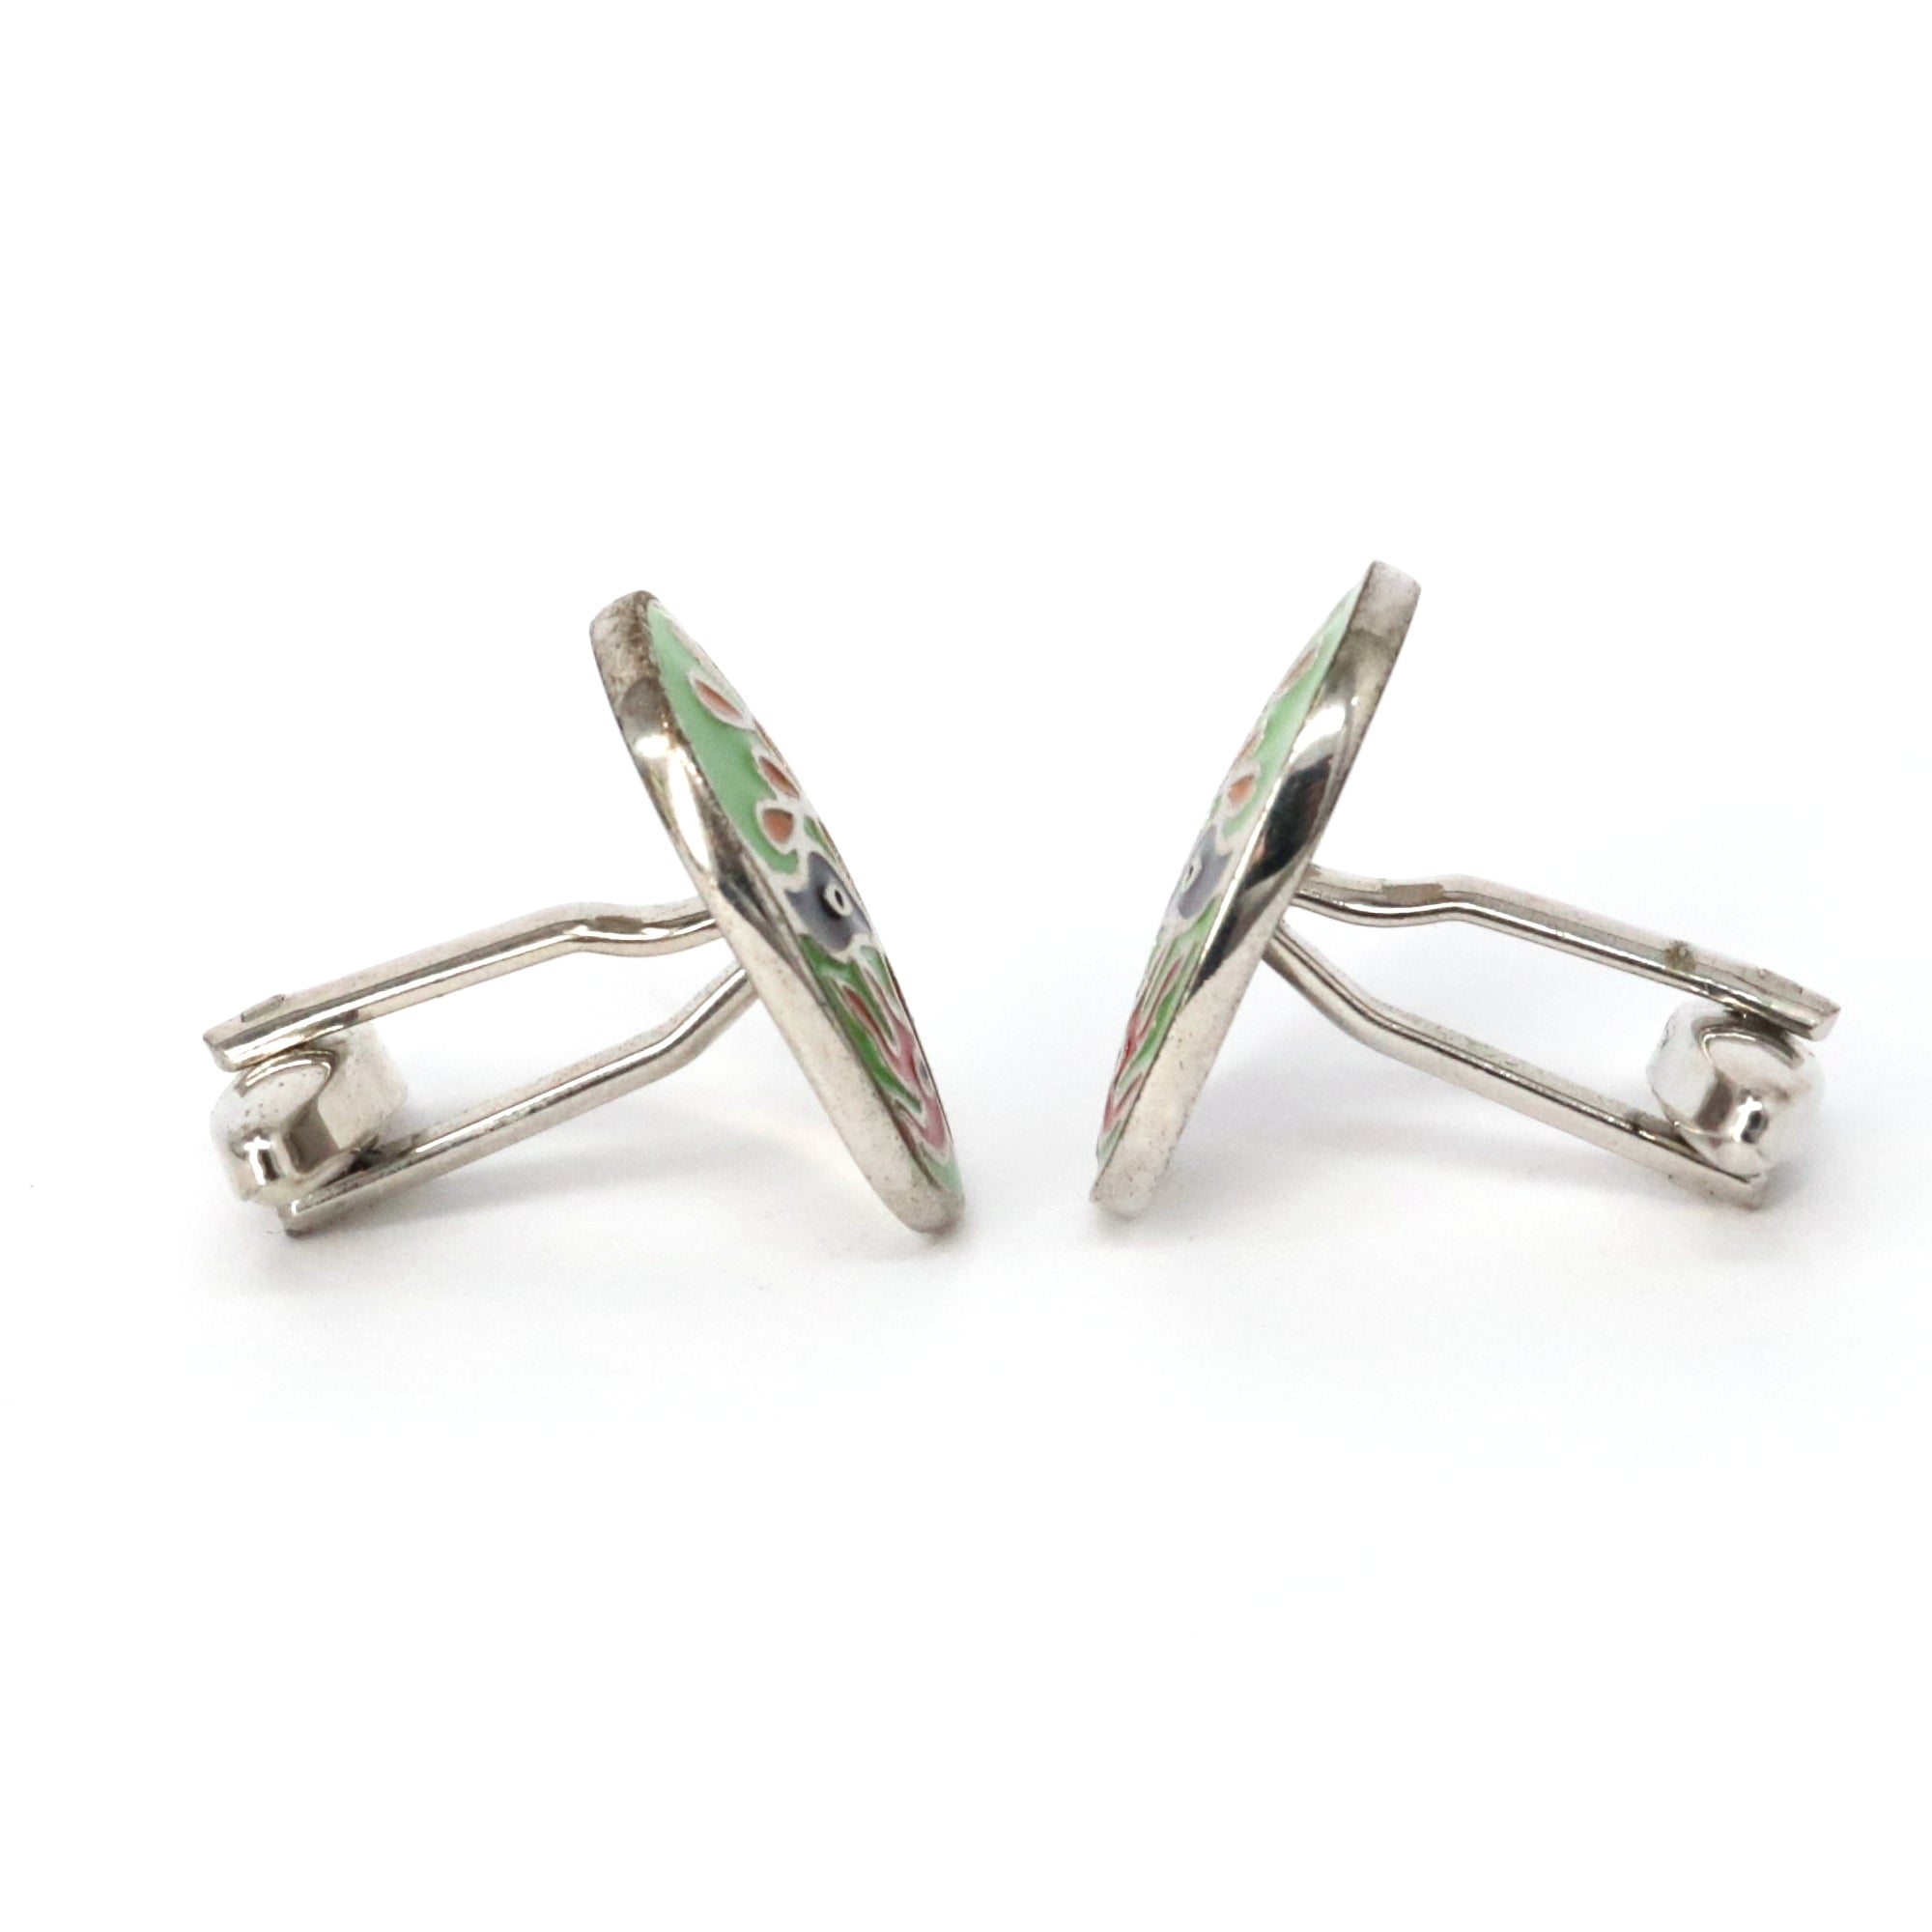 Jing Mask or Chinese Opera mask  green Cufflinks (Online Exclusive)